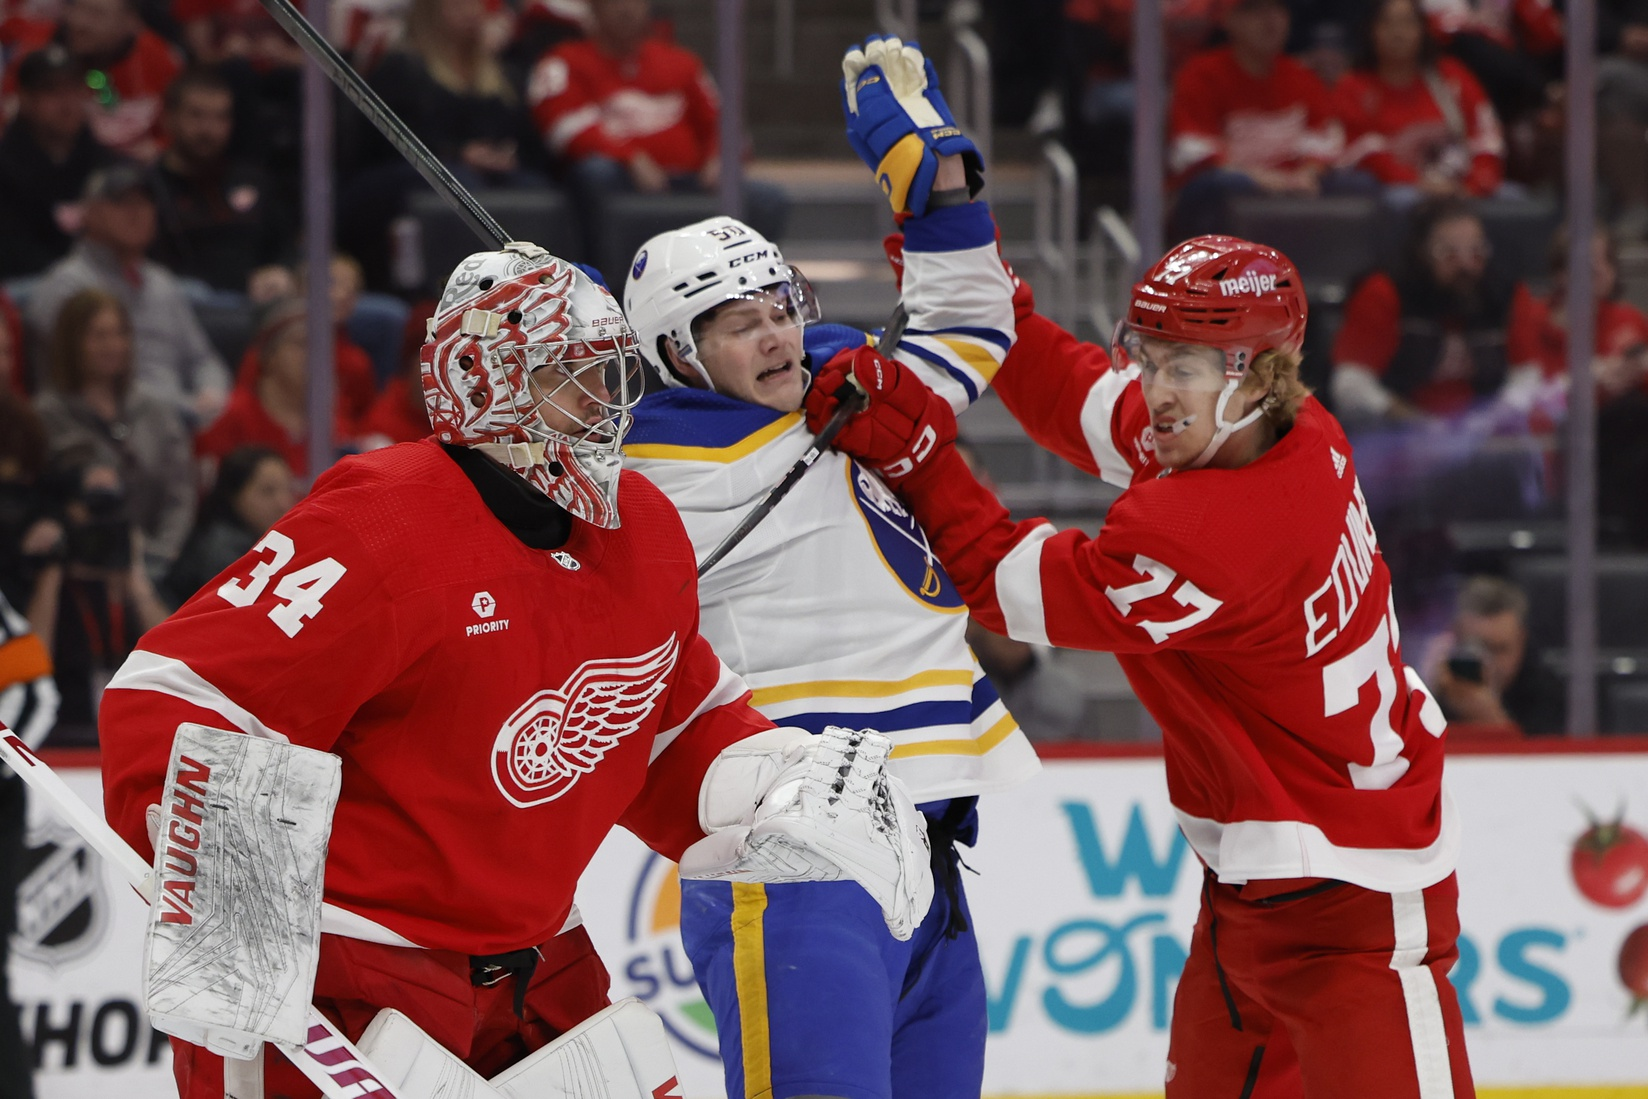 Did the Red Wings improve defensively?